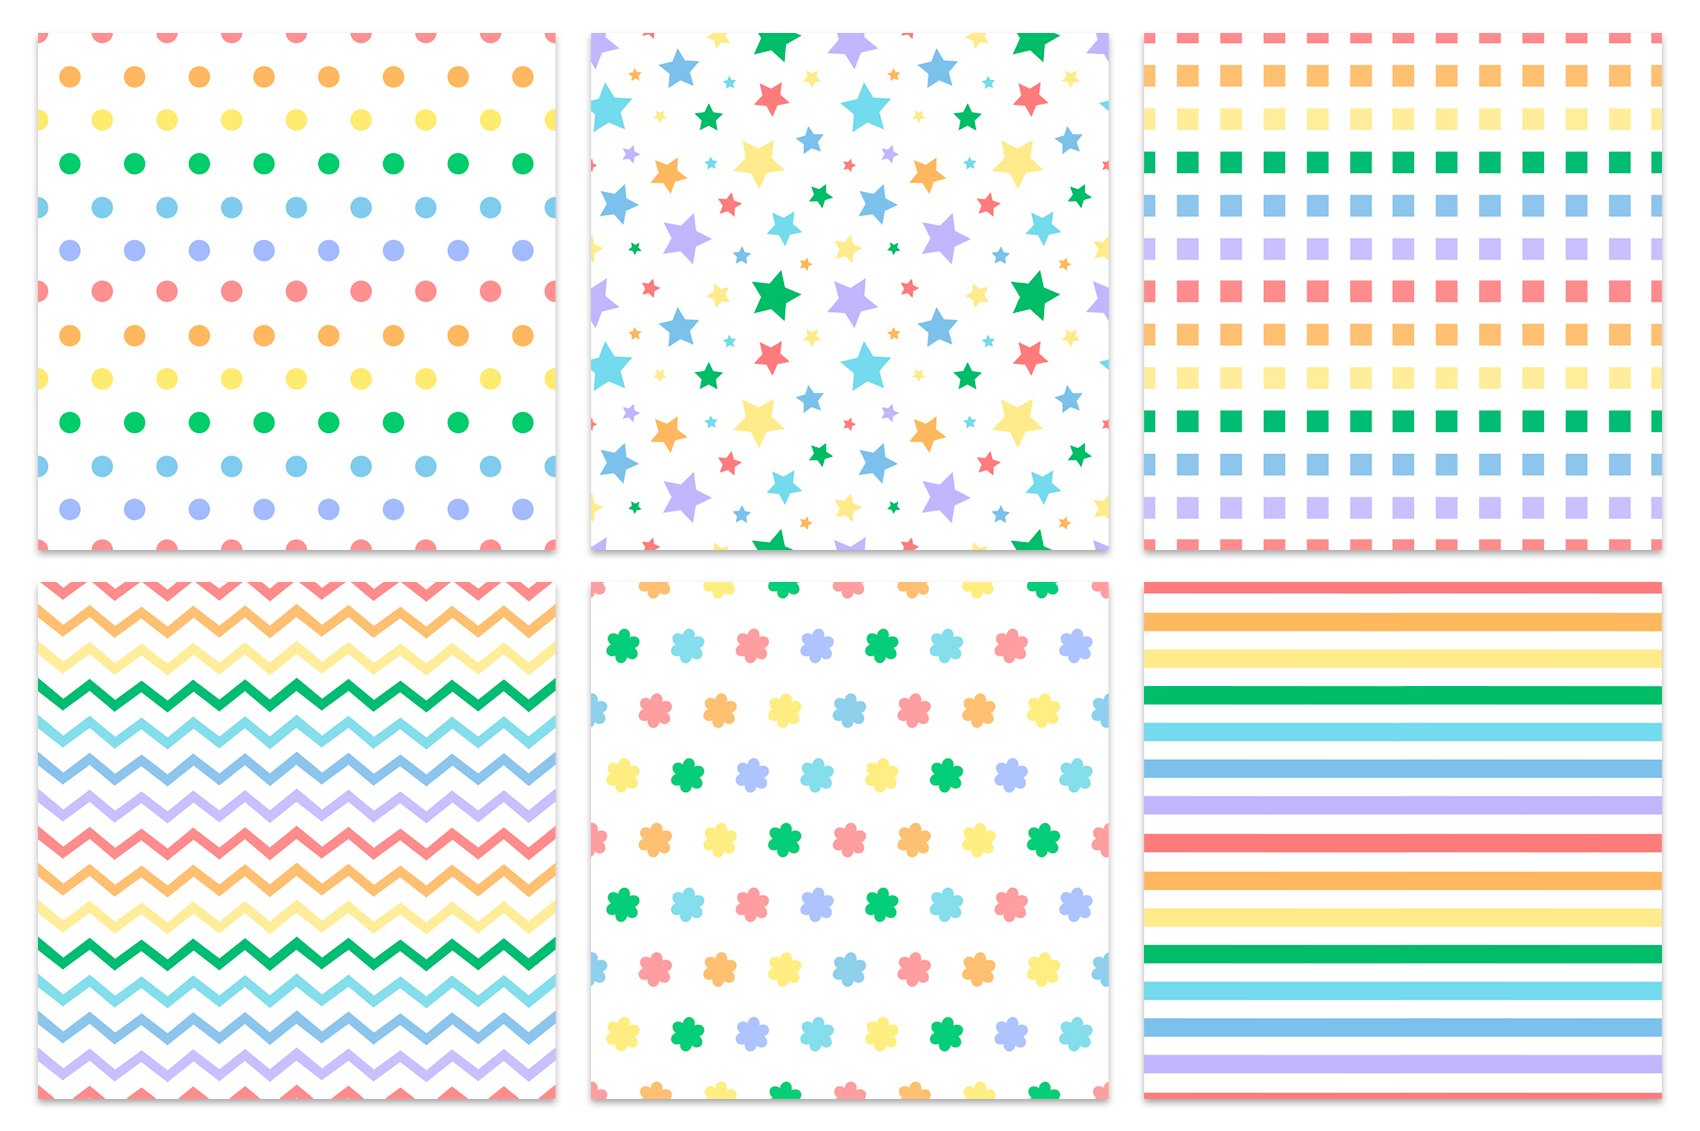 Rainbow pattern. Abstract pattern preview image.